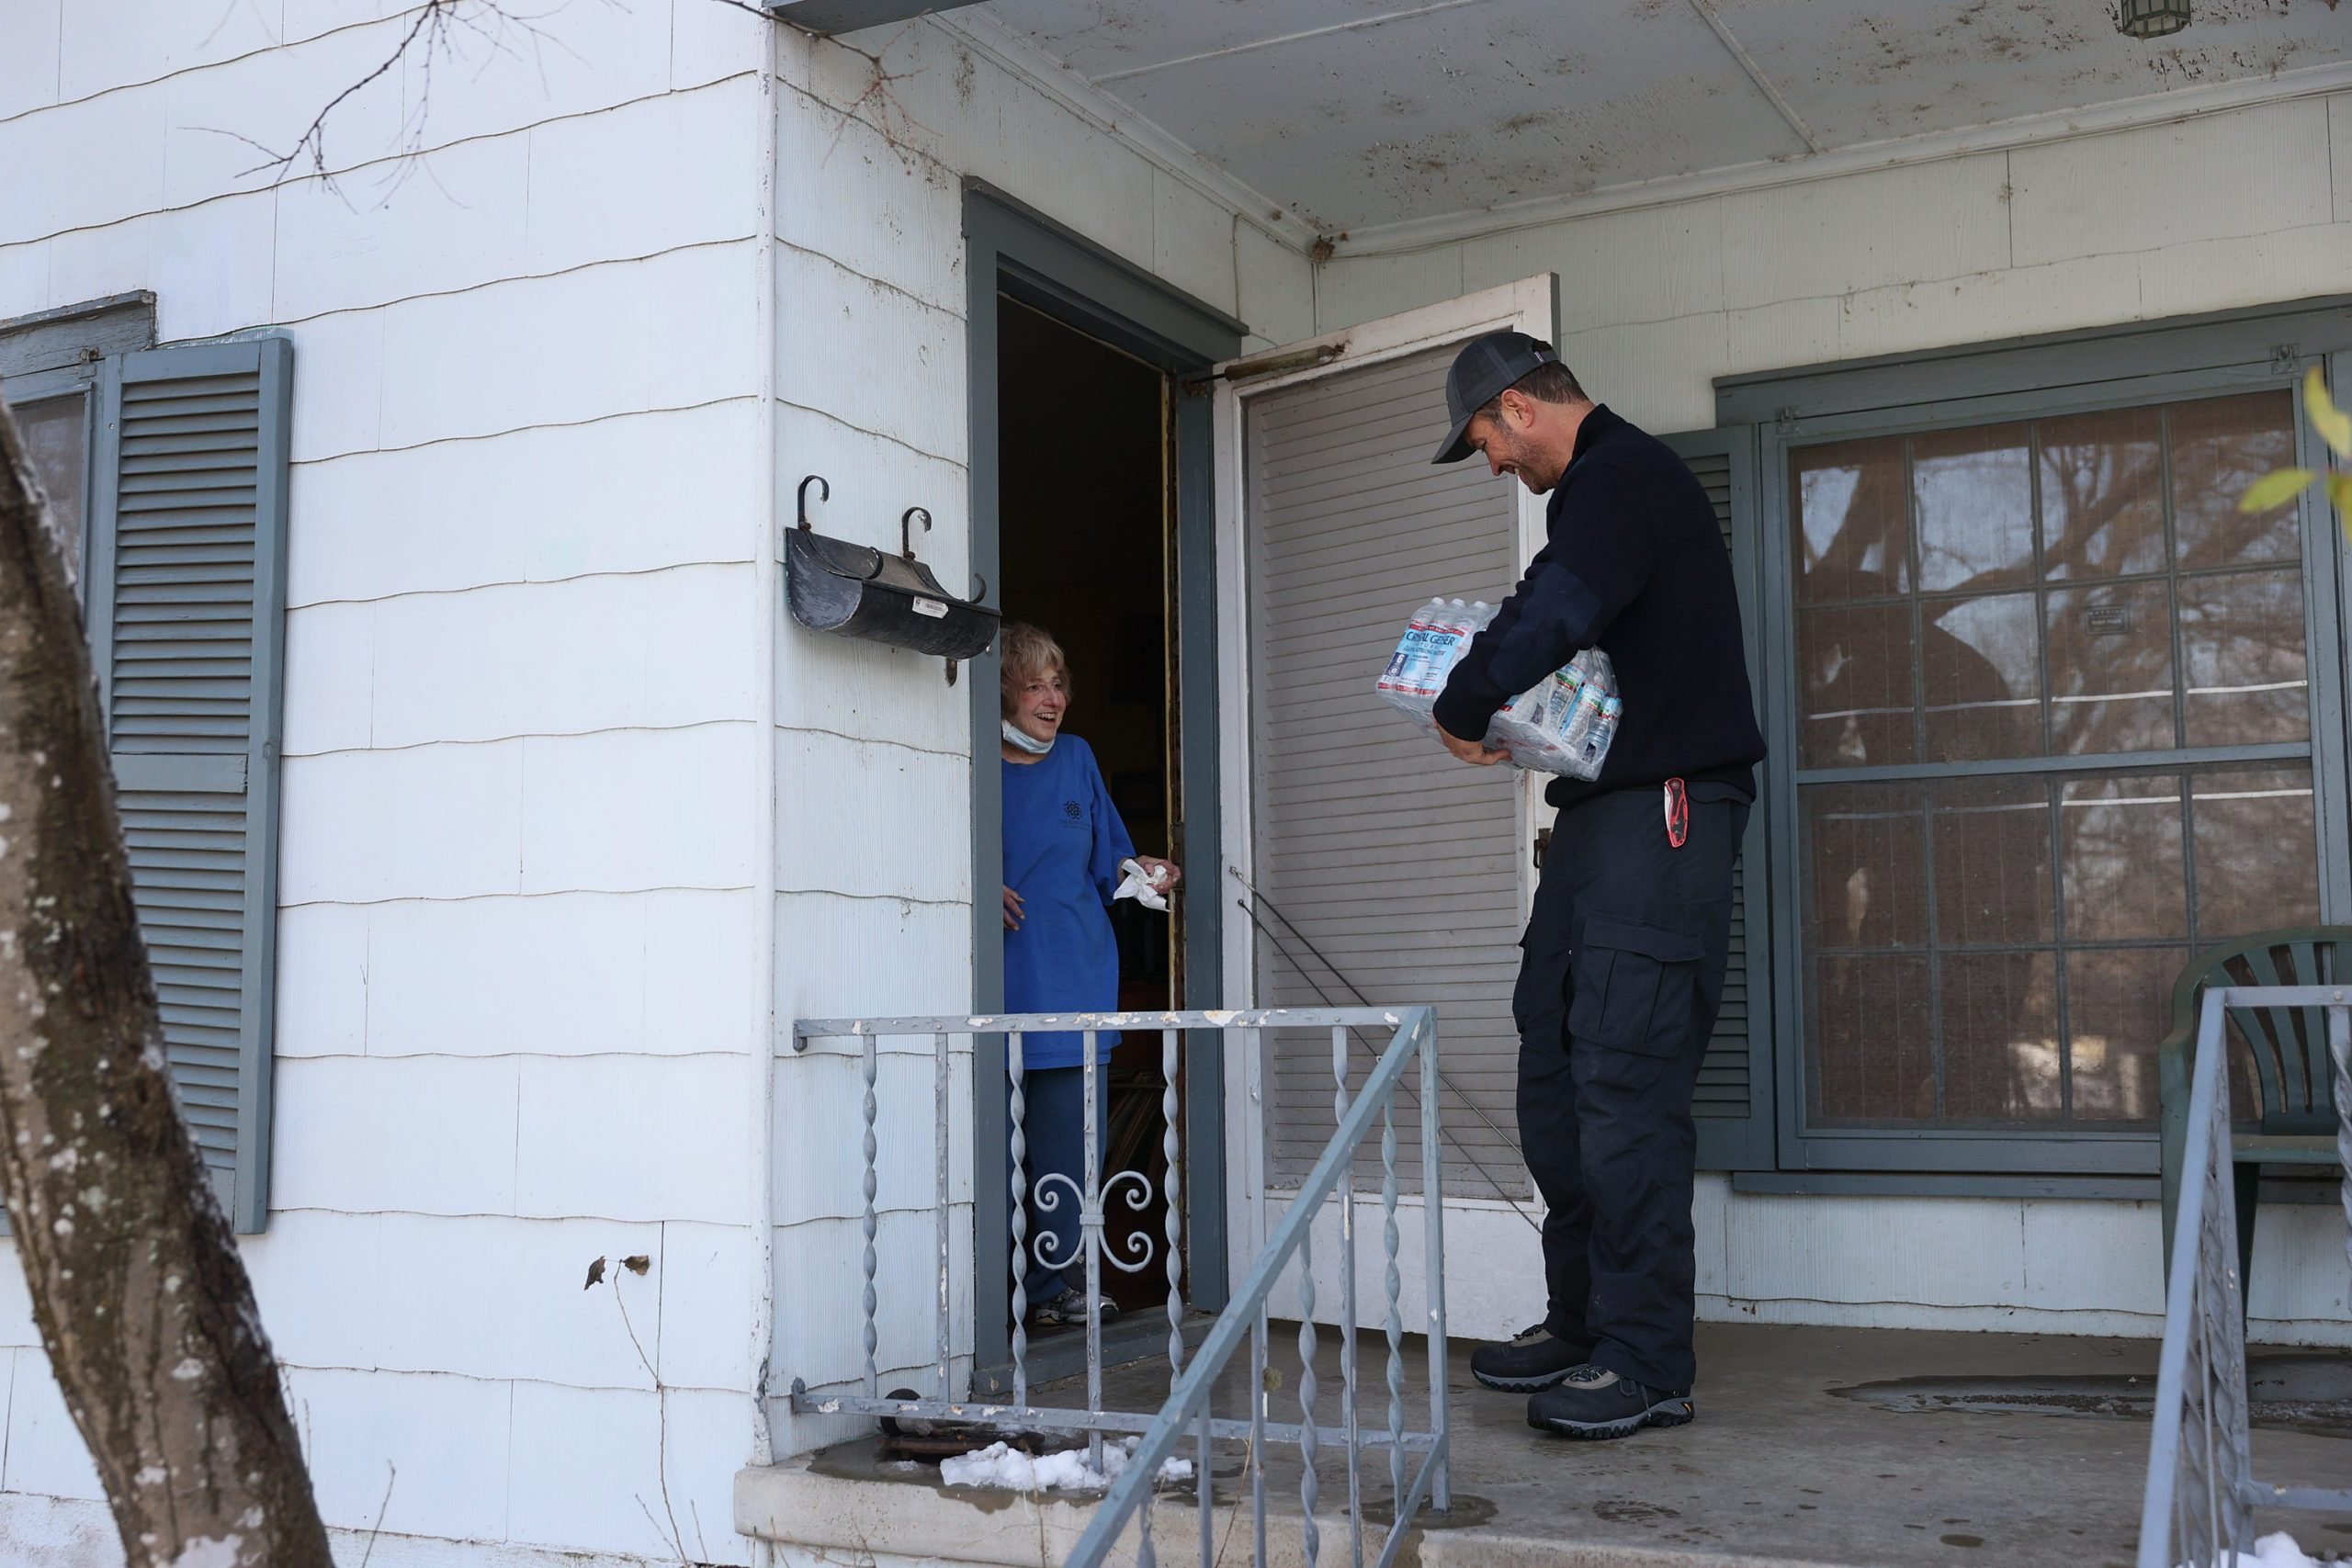 Jason Parish, a volunteer with the Austin Disaster Relief Network, delivers water to Beth Placek on February 19, 2021 in Austin, Texas.